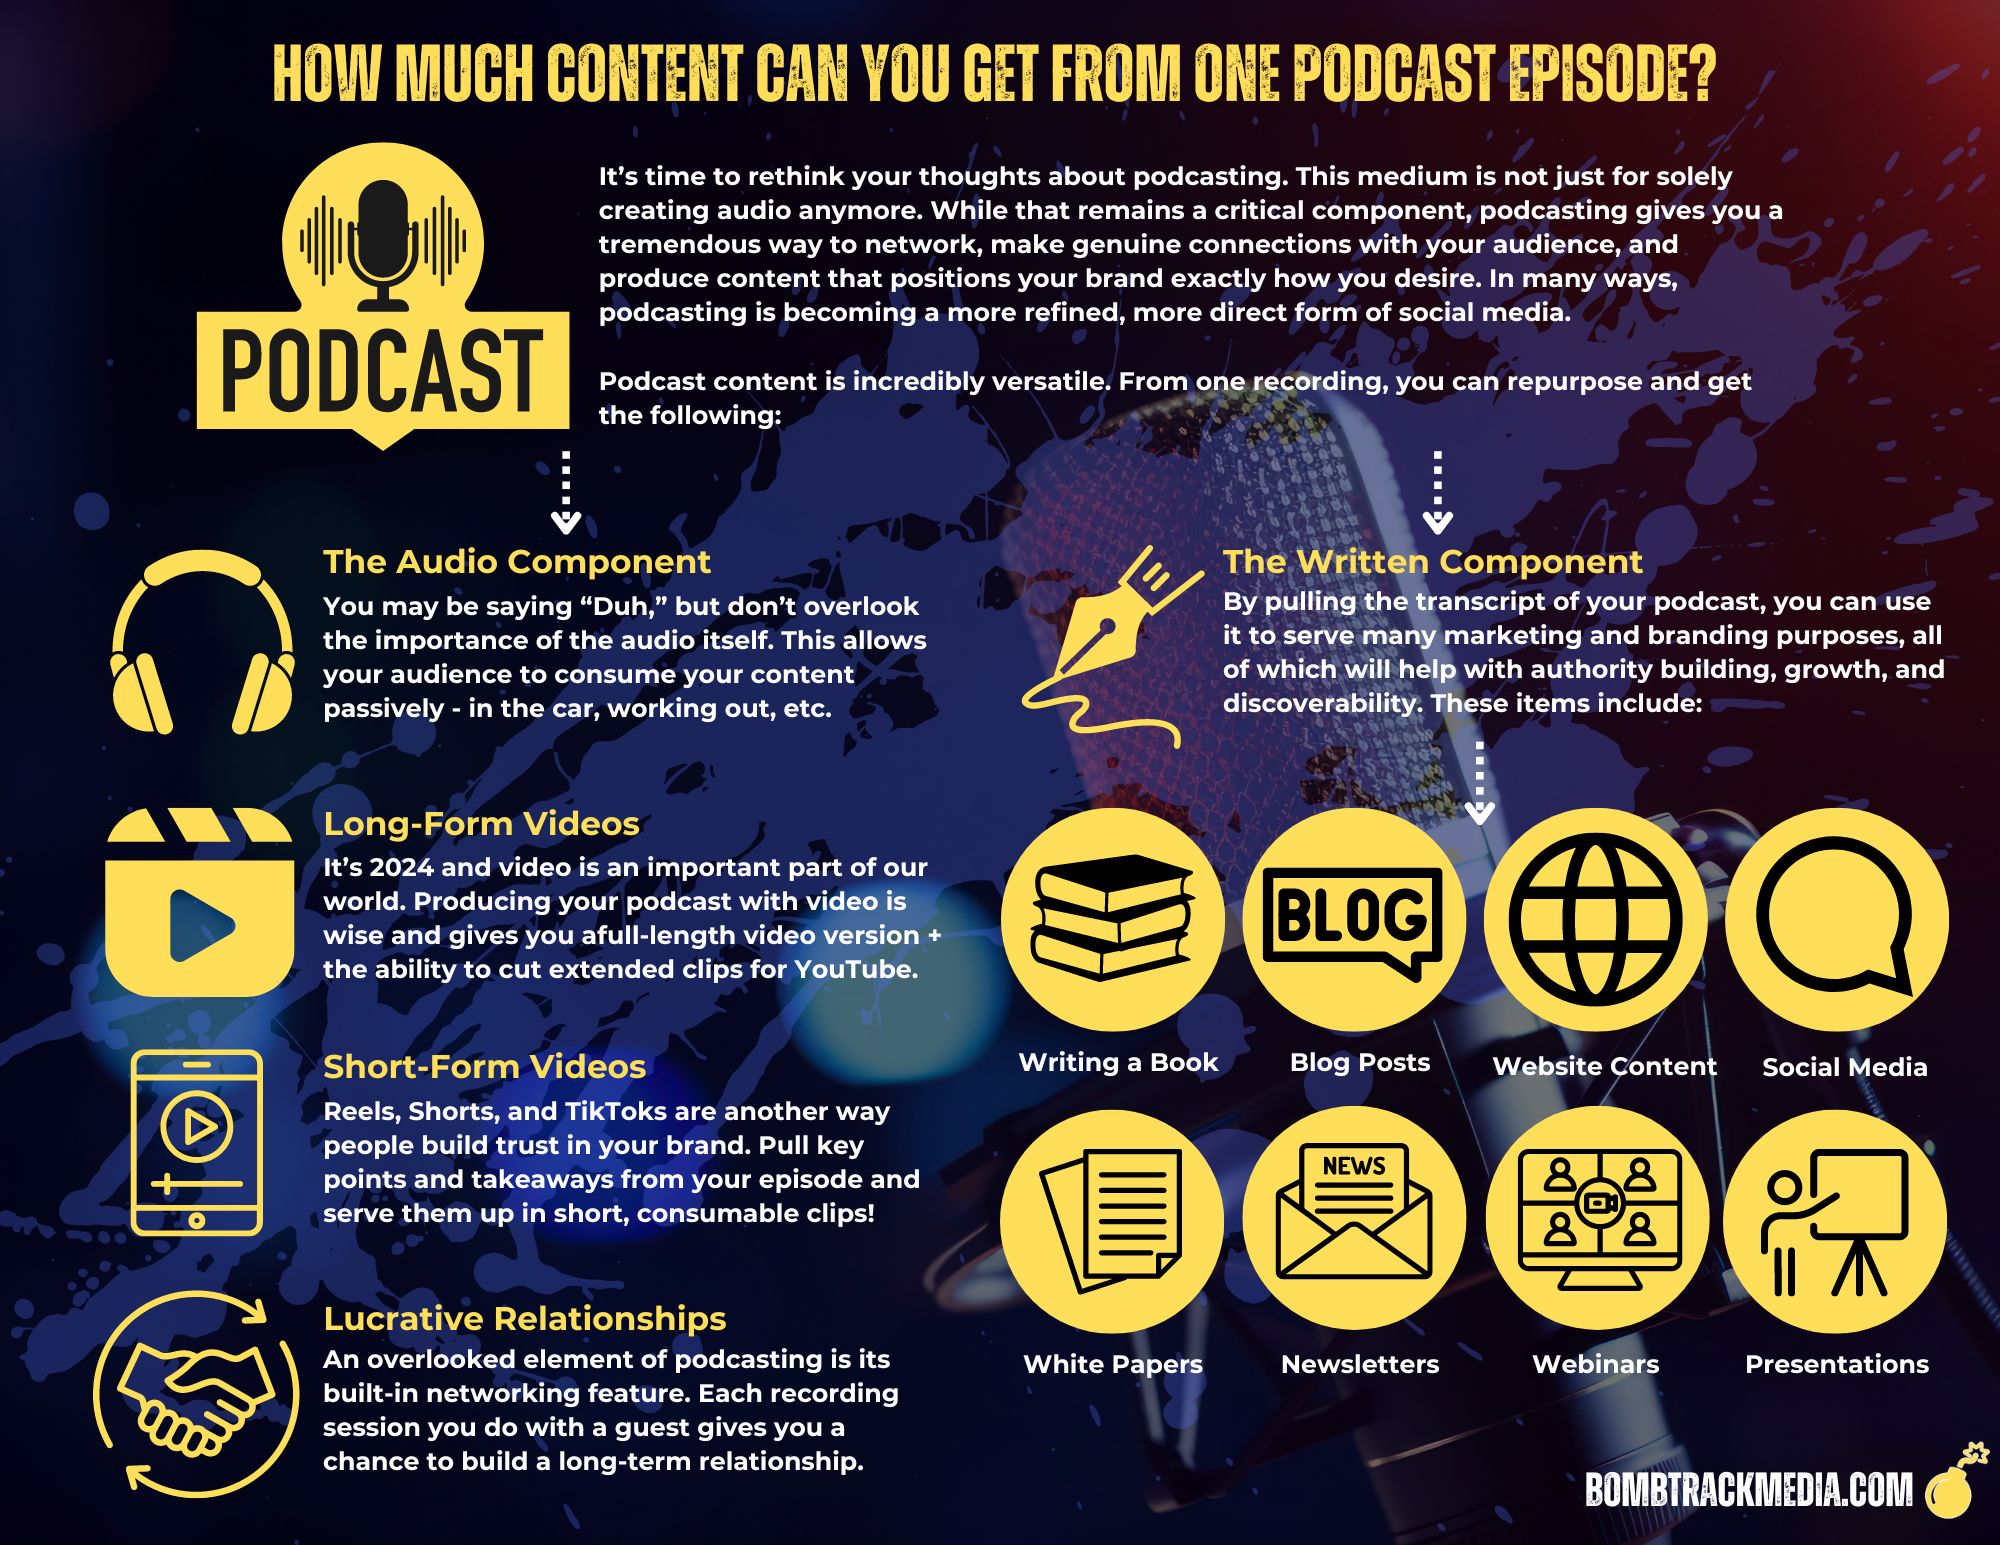 This infographic illustrates the amount of content that can be extracted and repurposed from a single podcast episode recording.